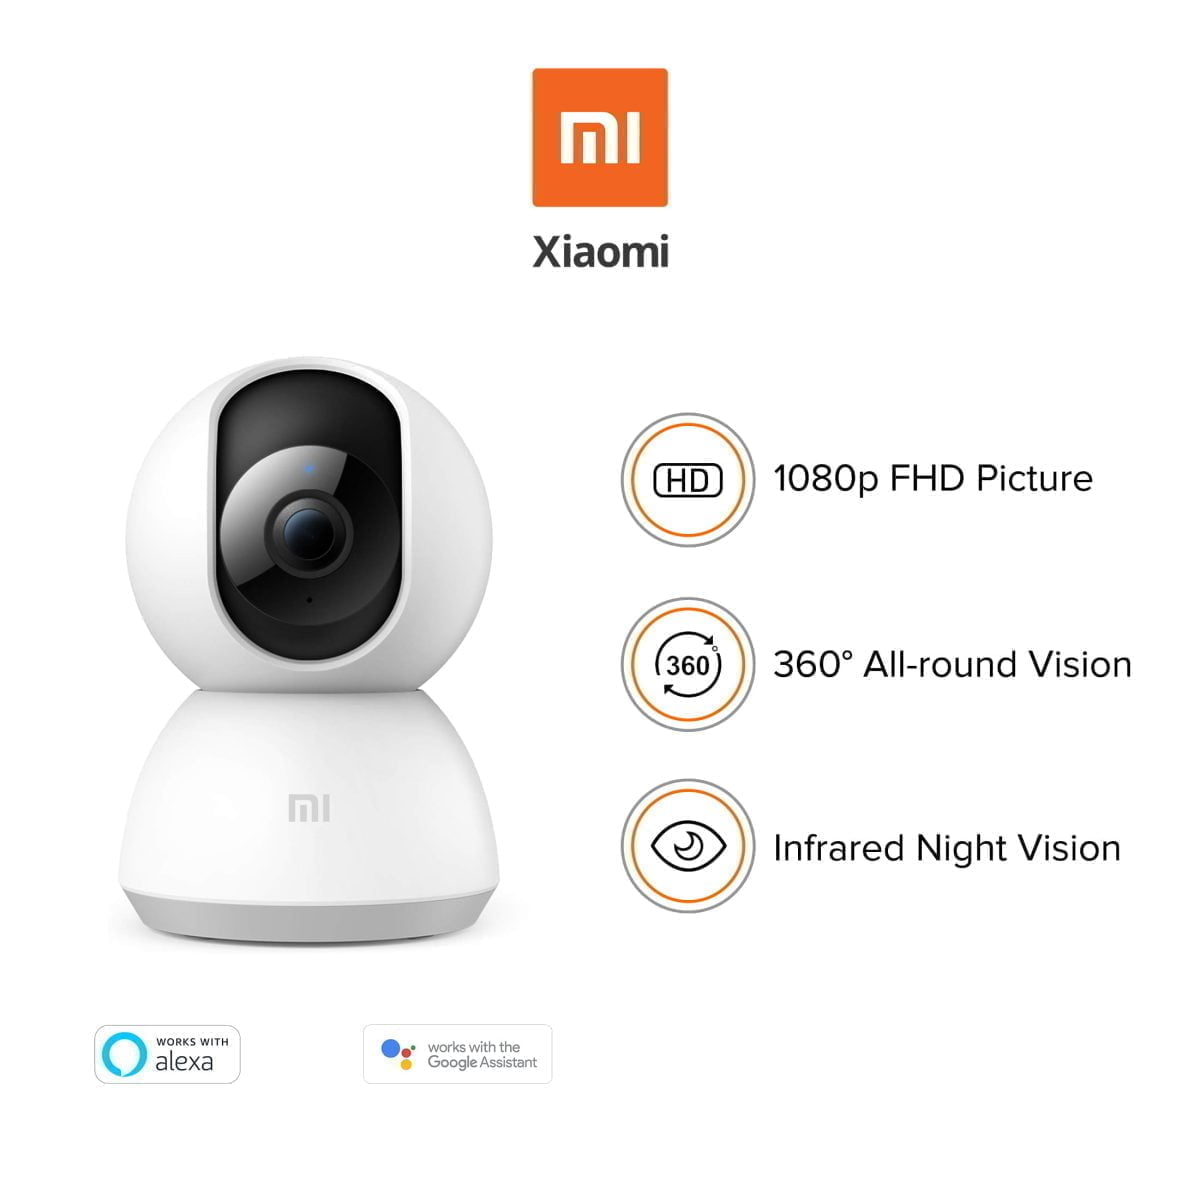 Pms 1578997732.52867814 Xiaomi [Video Width=&Quot;720&Quot; Height=&Quot;404&Quot; Mp4=&Quot;Https://Lablaab.com/Wp-Content/Uploads/2019/11/2160991042151.Mp4&Quot;][/Video] &Lt;Strong&Gt;Xiaomi Xiaobai Gmsxj16A Mijia App Smart Ip Camera 1080P 360° Night Version Home Baby Monitor Ai Humanoid Detection &Lt;/Strong&Gt; &Lt;Strong&Gt;- Remote Viewing Automatic Alarm &Lt;/Strong&Gt; The Mijia App Can Not Only View Real-Time Video Remotely, But Also Make Two-Way Voice Calls. When The Watching Home Mode Is Turned On, The Camera Detects An Abnormal Situation And Automatically Records The Alarm Video And Pushes It To The Mobile Phone. &Lt;Strong&Gt;- Ai Humanoid Detection&Lt;/Strong&Gt; &Lt;Div&Gt;After The Mijia App Has Turned On The Housekeeping Mode, The Camera Detects An Abnormal Situation, Automatically Records The Alarm Video, And Pushes The Message To The Phone. Combined With Ai Technology, The Algorithm Is Optimized For The Target, Effectively Reducing The Invalid Alarm And Making The Alarm More Accurate.&Lt;/Div&Gt; &Lt;Div&Gt;&Lt;Strong&Gt;- Hd Panoramic Night Vision Enhancement&Lt;/Strong&Gt;&Lt;/Div&Gt; &Lt;Div&Gt;With Dual-Motor Drive, The Control Unit 360° Horizontal Rotation Adjusts The Angle Of View, High-Definition Picture Quality Allows The Picture To Retain More Details, Noise Reduction Infrared Night Vision, Even At Night, Can Present A Clear Picture&Lt;/Div&Gt; &Lt;Div&Gt;&Lt;Strong&Gt;- Watch Smooth And Save Space&Lt;/Strong&Gt;&Lt;/Div&Gt; &Lt;Div&Gt;Adopting H.265 Video Coding Technology, The Viewing Is Smoother Under The Same Network Conditions, And The Video Takes Up Less Space.&Lt;/Div&Gt; &Lt;Div&Gt; &Lt;Strong&Gt;- Smart Linkage, Security Upgrade &Lt;/Strong&Gt; &Lt;Div&Gt; With Mijia App, You Can Mix With Other Mijia Smart Products, You Can Customize Your Own Personalized Scene To Better Protect The Privacy Of Individuals And Family. &Lt;Strong&Gt;- Support Multi-Person Terminal Remote Viewing &Lt;/Strong&Gt; Support Mobile Phone/Tablet Remote Viewing, And Share Real-Time Pictures To Family And Friends At The Same Time. For Historical Video Recording Stored In Micro Sd Card, Support 1X/4X/6X Double-Speed Playback, Which Can Be Quickly Searched, Saving Time And Effort &Lt;/Div&Gt; &Lt;/Div&Gt; Mi Home Security Camera 1080P Mi Home Security Camera 1080P Global (360 Deg) With Night Vision, Supports (Alexa And Google Assistant)